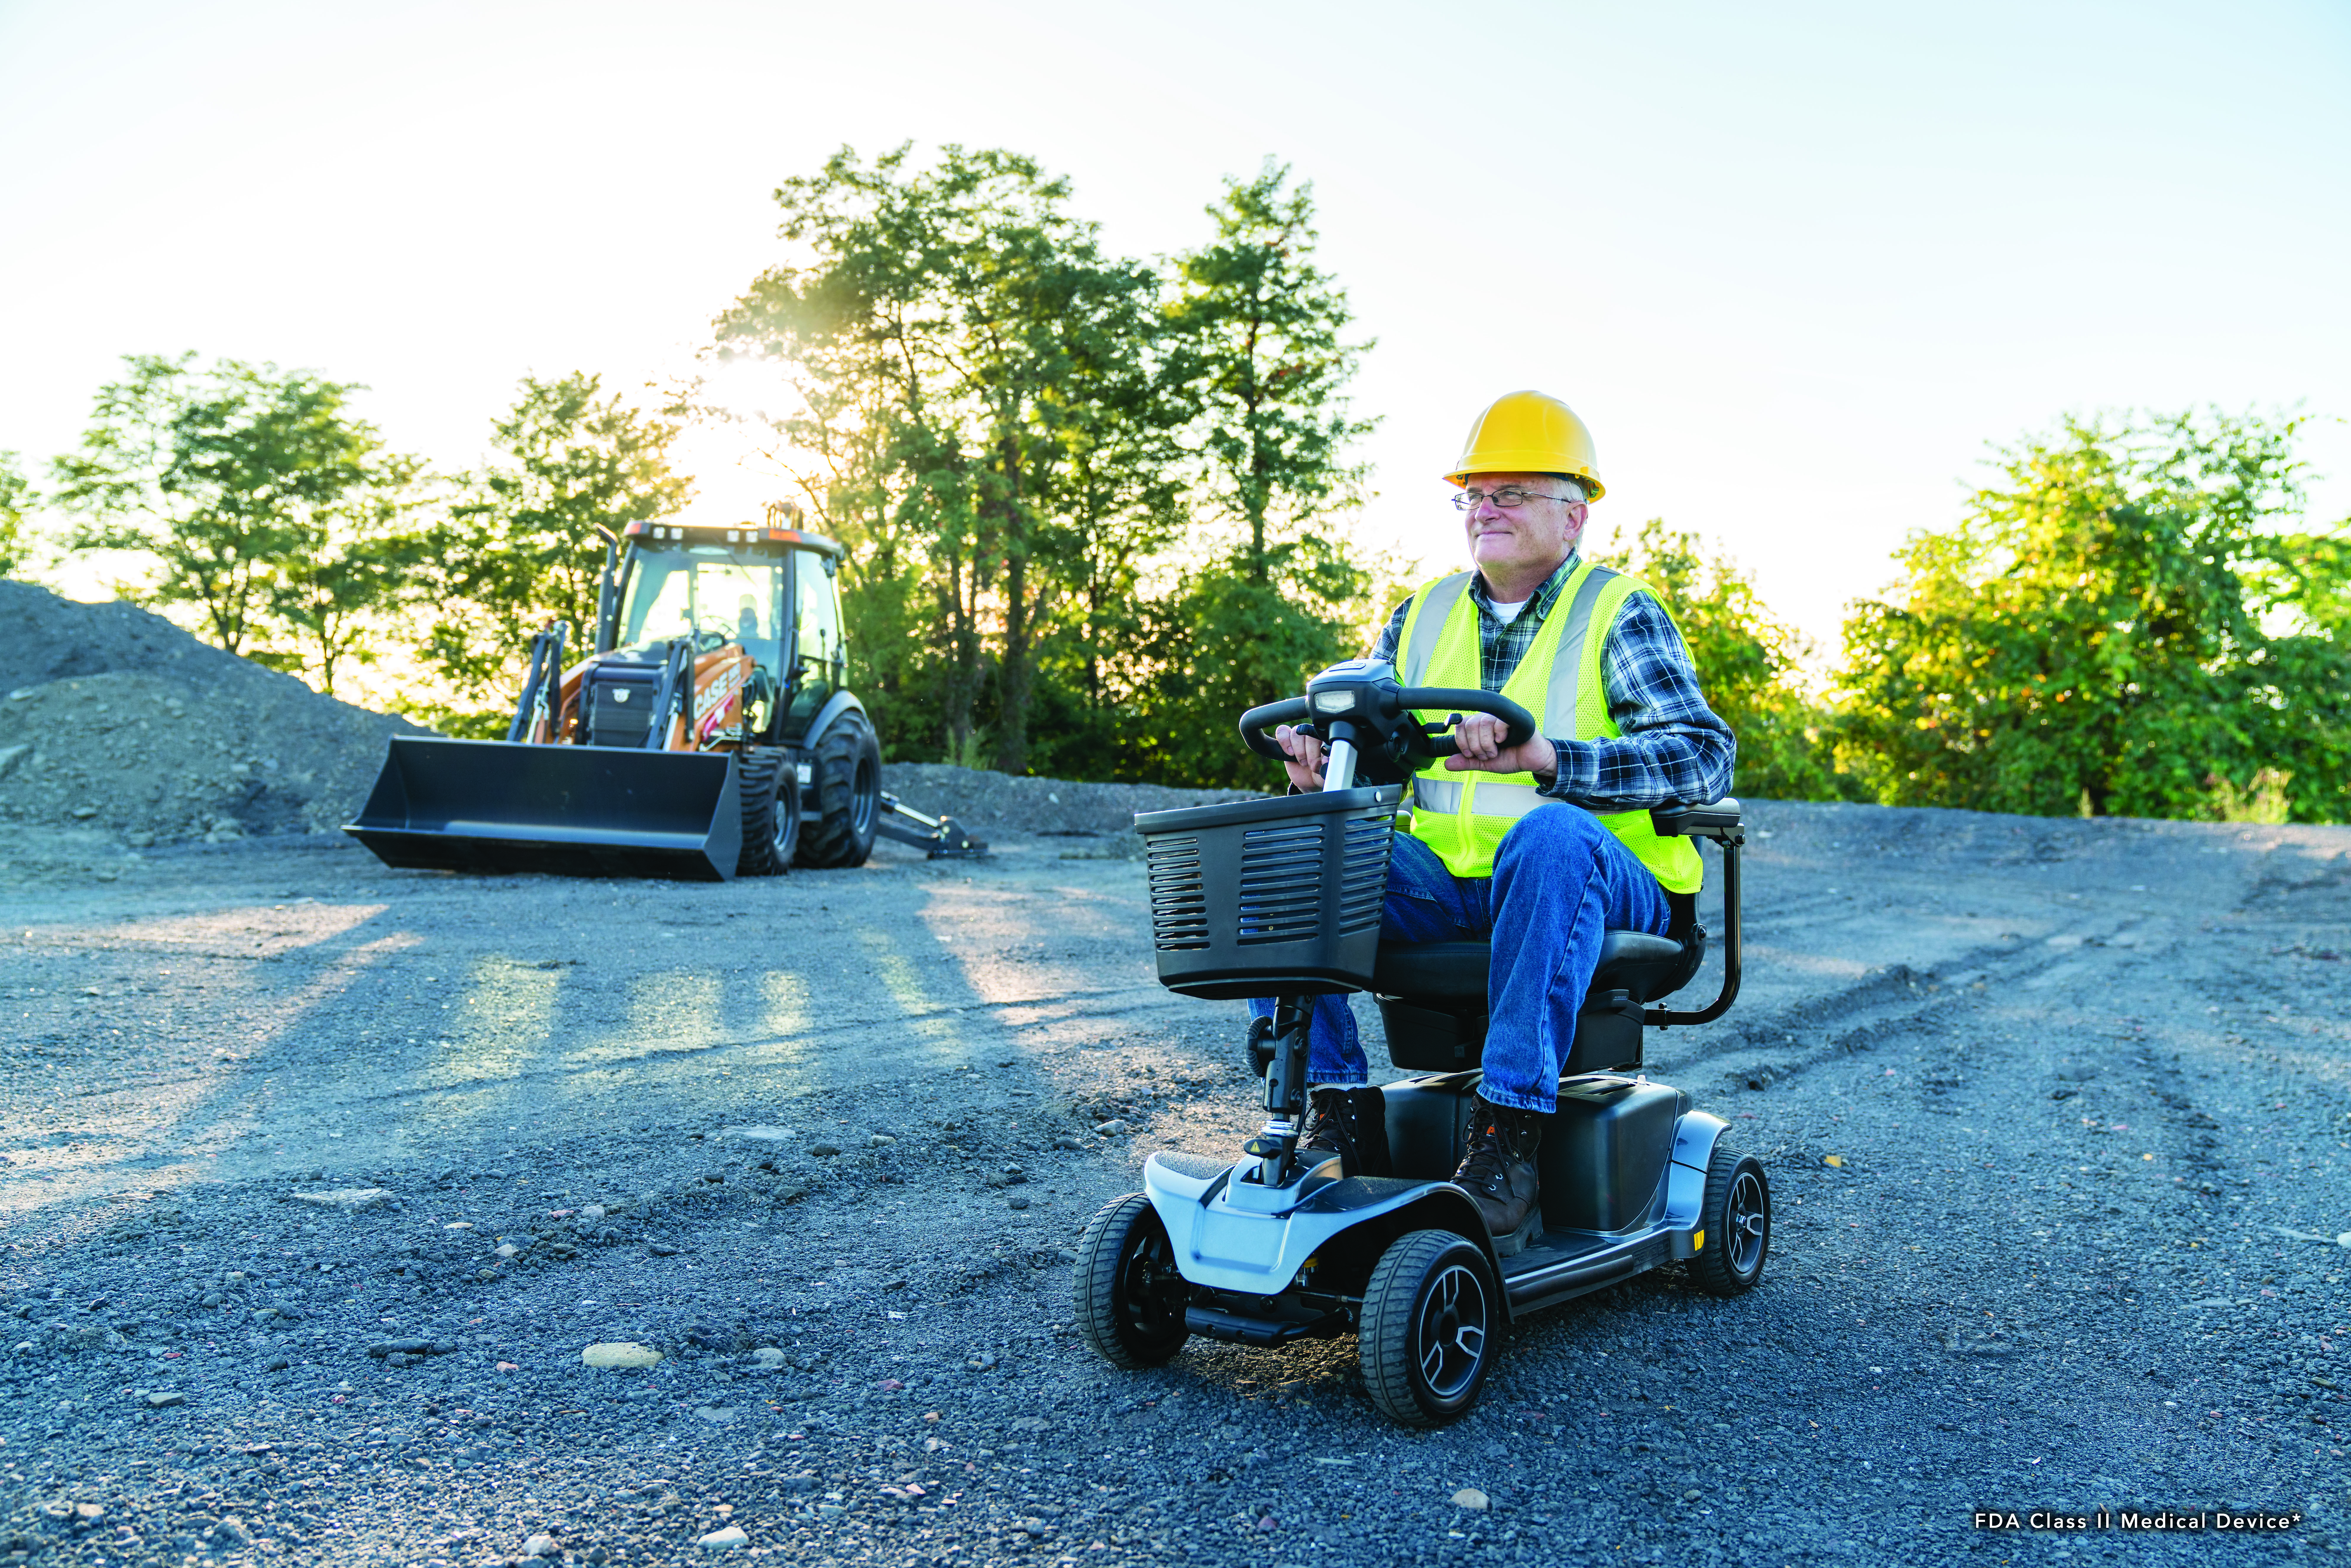 A man using his electric scooter on a job site.